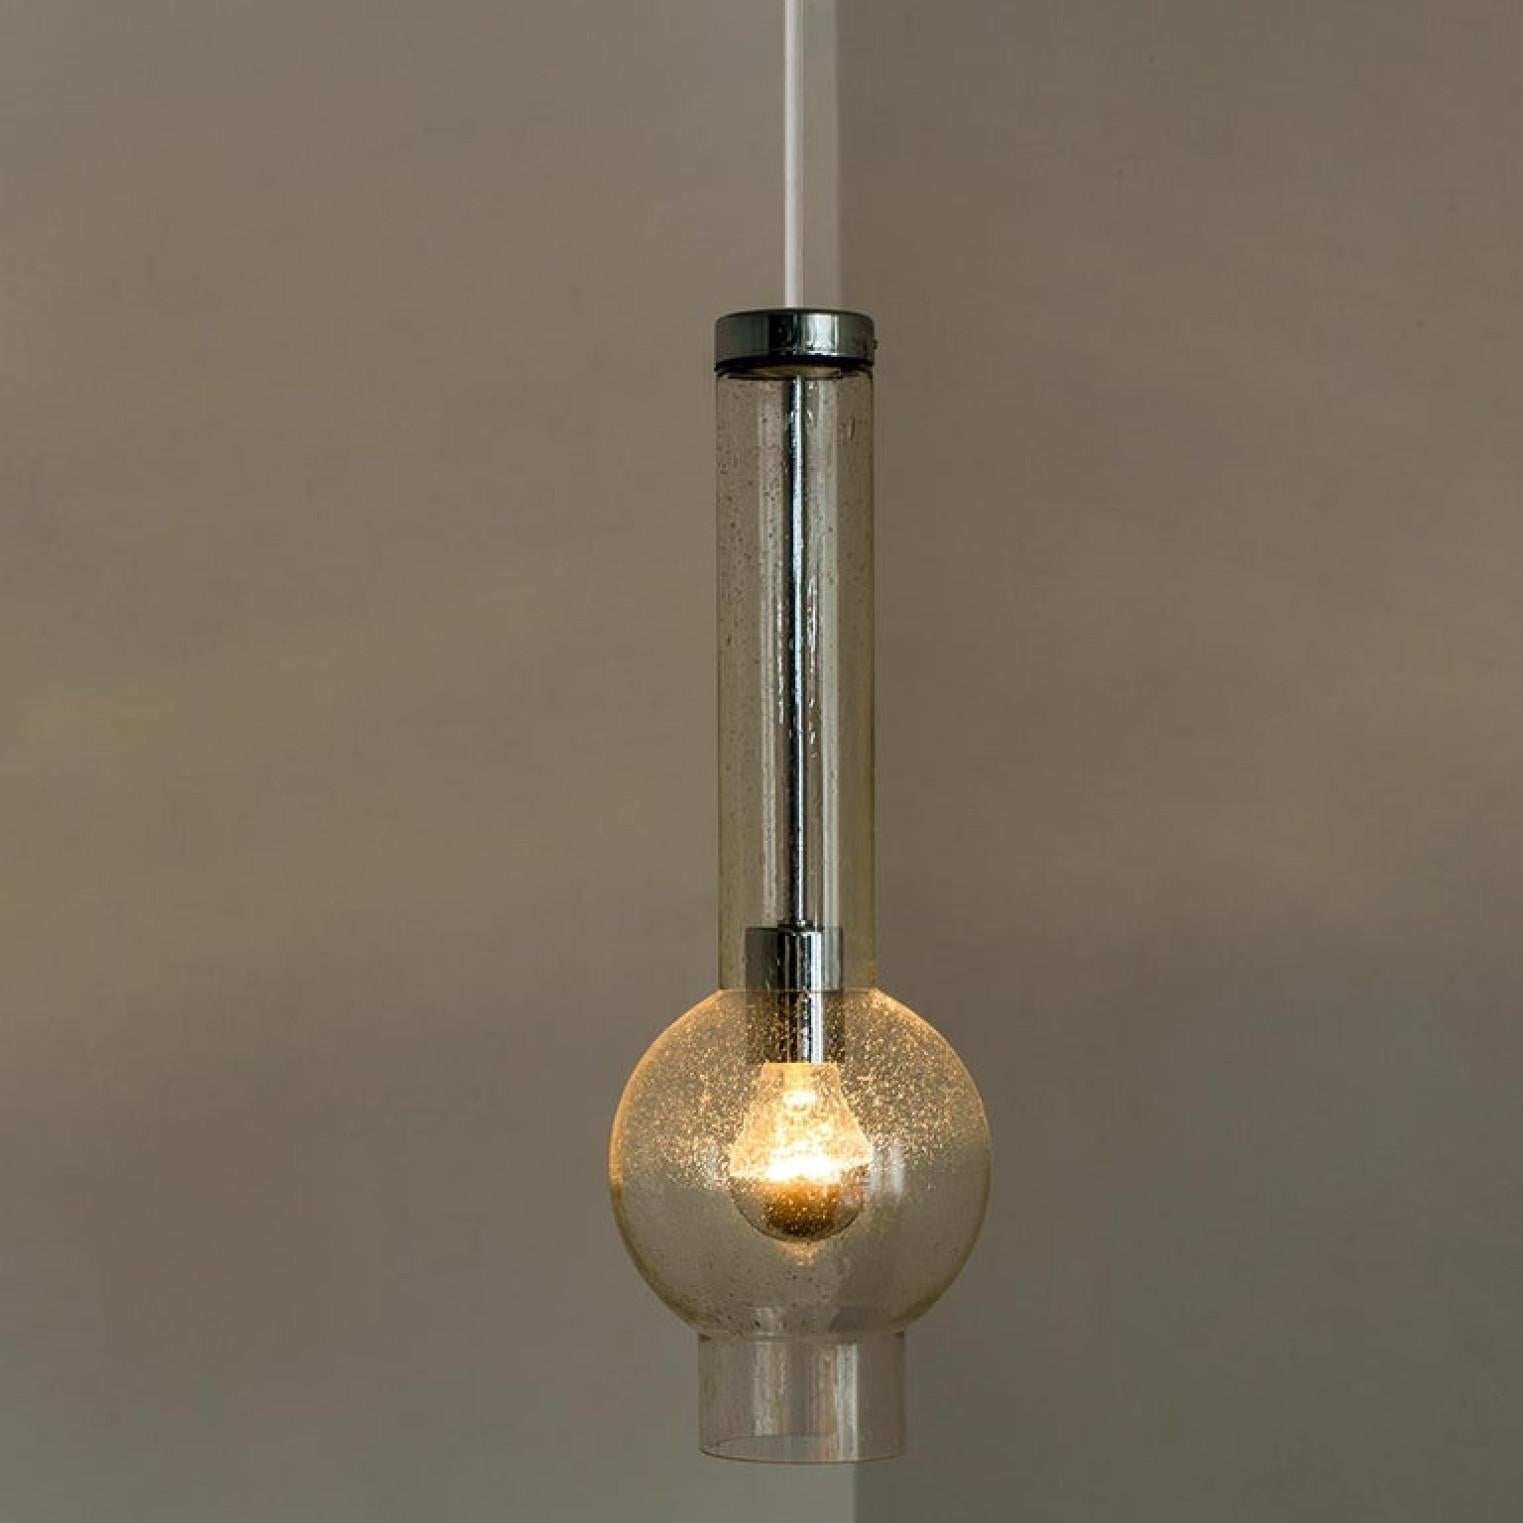 1 of the 10 of Hand Blown Glass Tube Pedant Lights by Staff Lights, 1970s For Sale 5